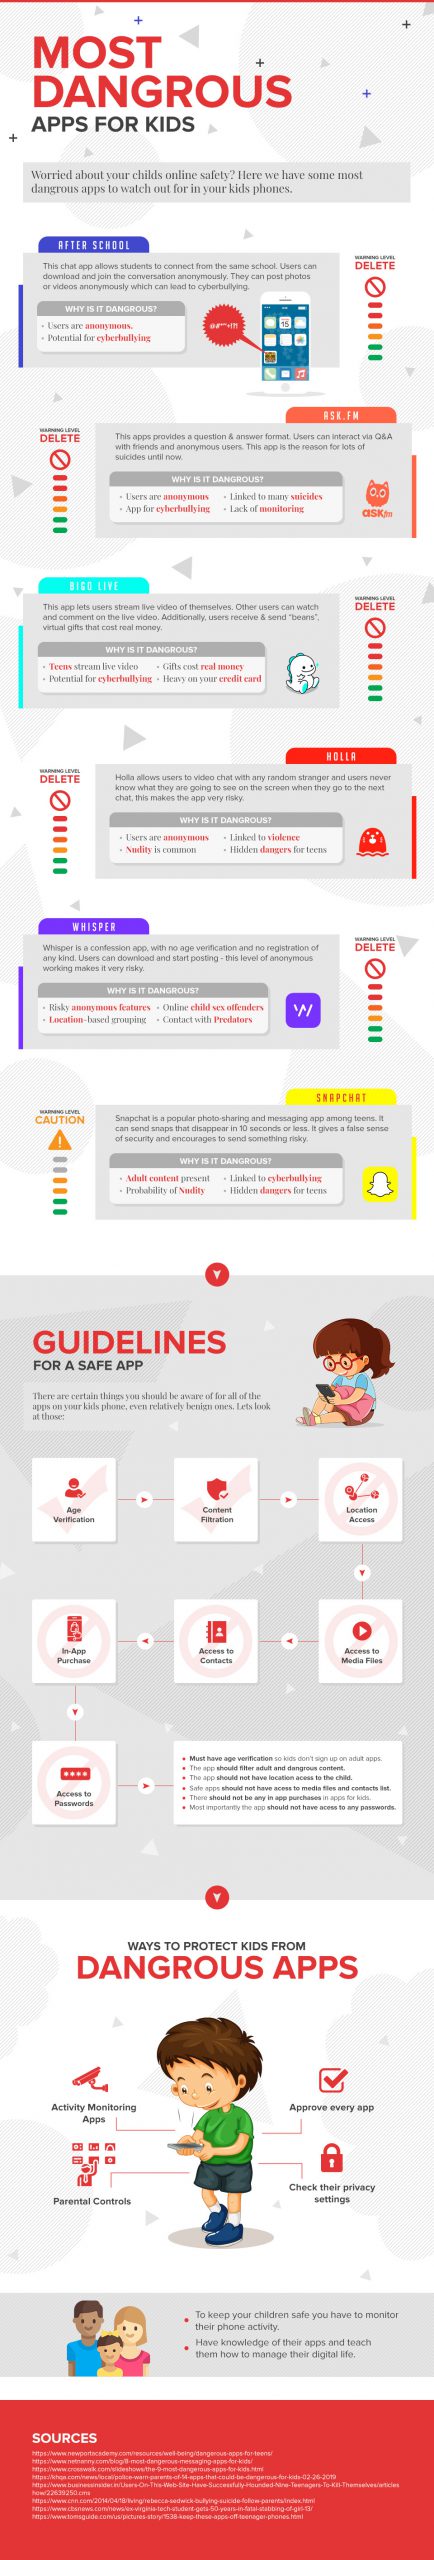 most dangerous apps for kids scaled